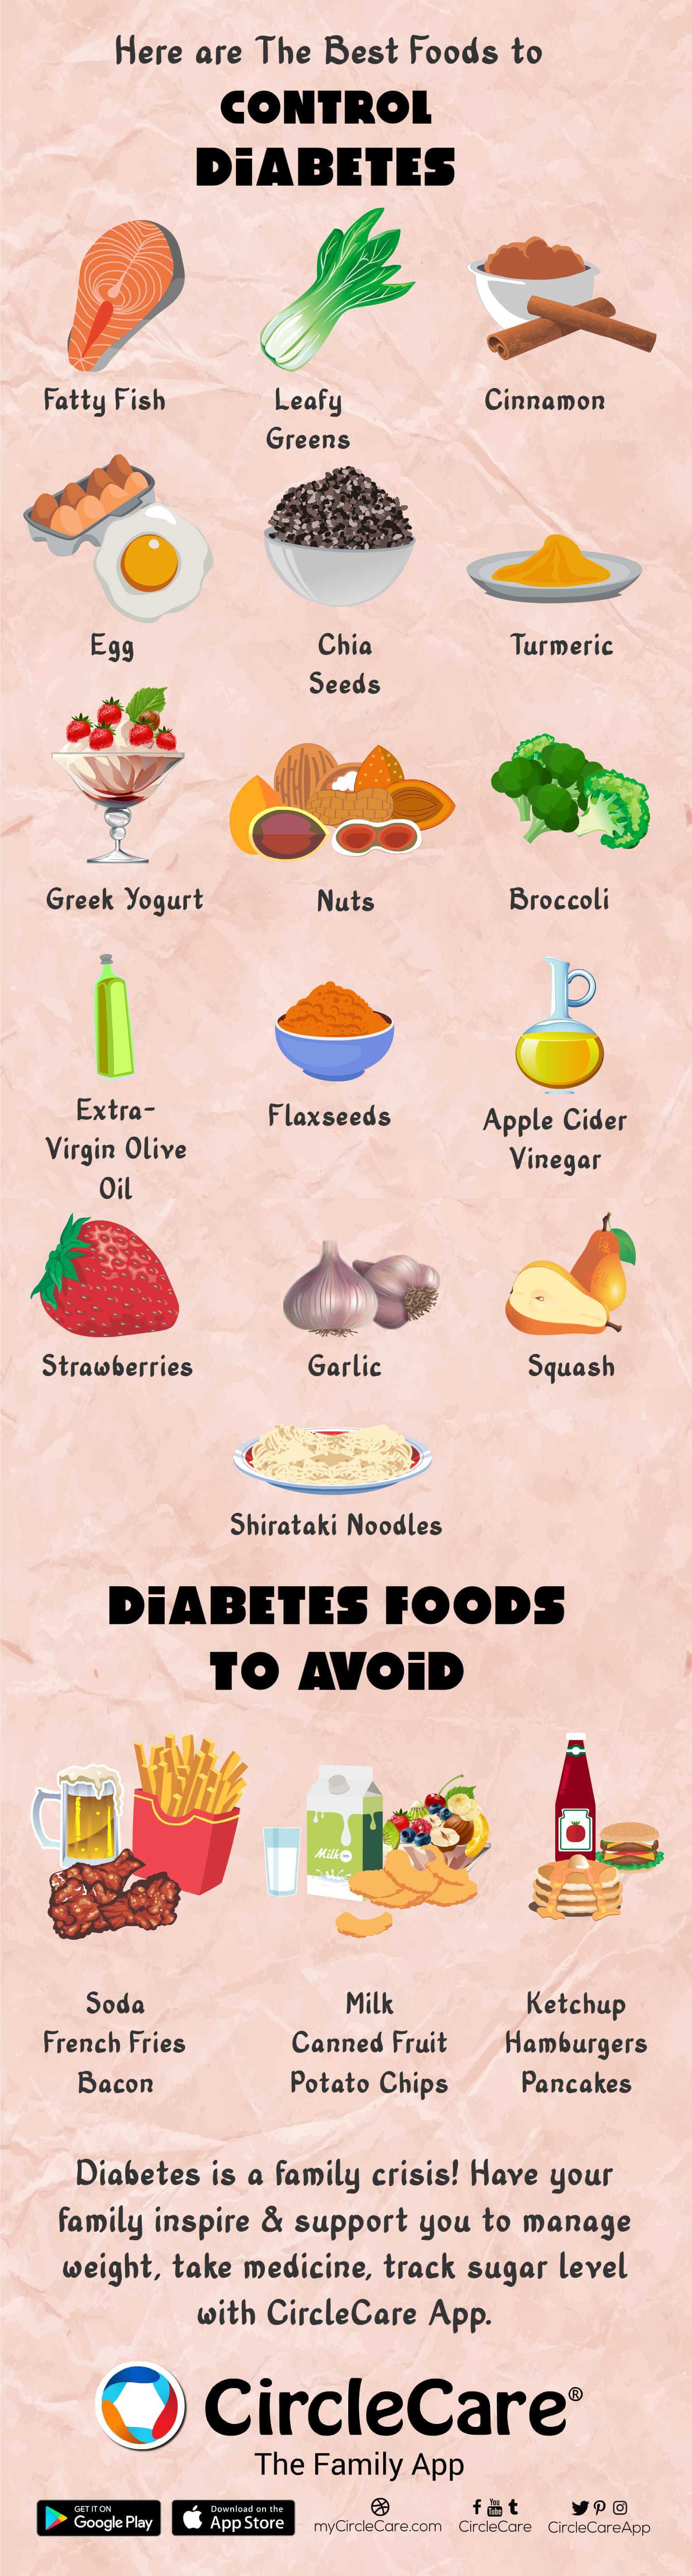 Best foods for controlling diabetes in the family-CircleCare